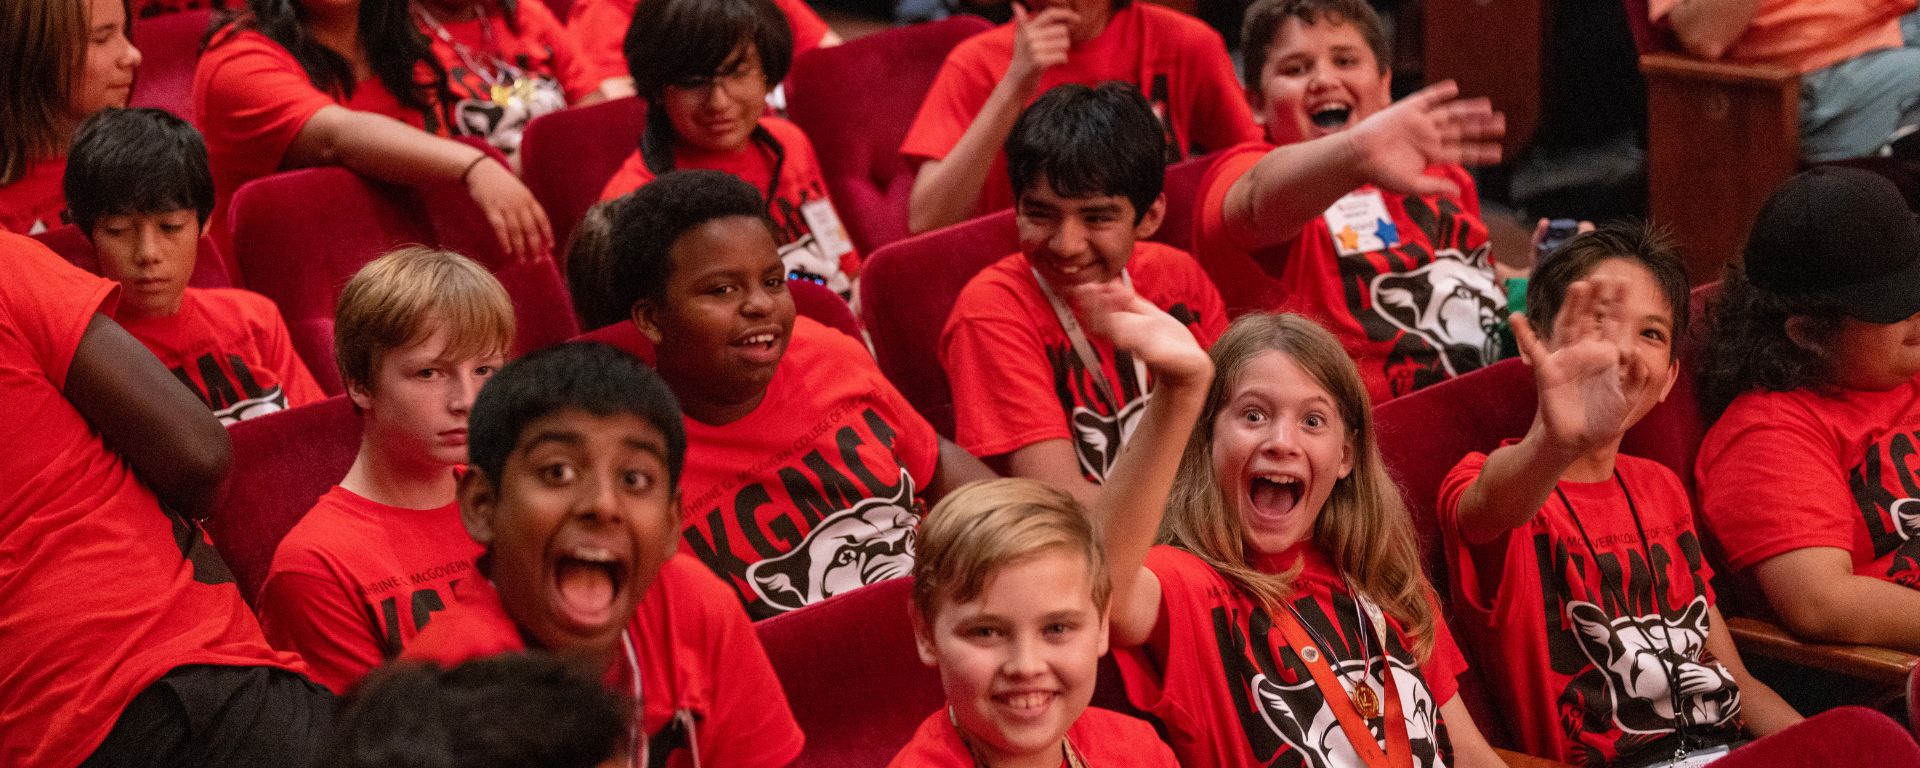 Smiling and waving middle school band students in red KGMCA shirts